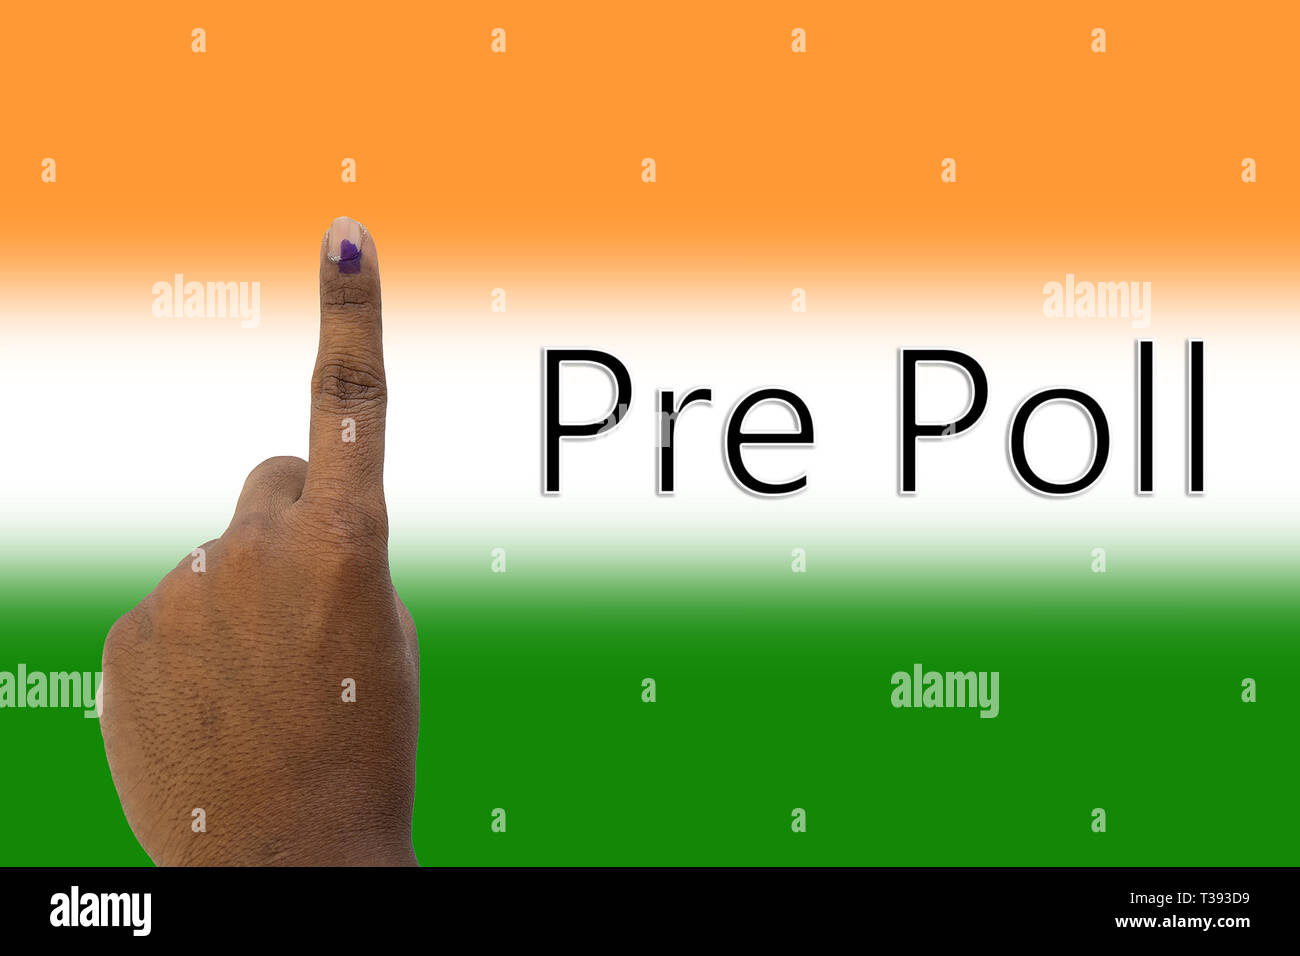 Pre-poll and hand showing of Indian election polling on Indian flag. Stock Photo